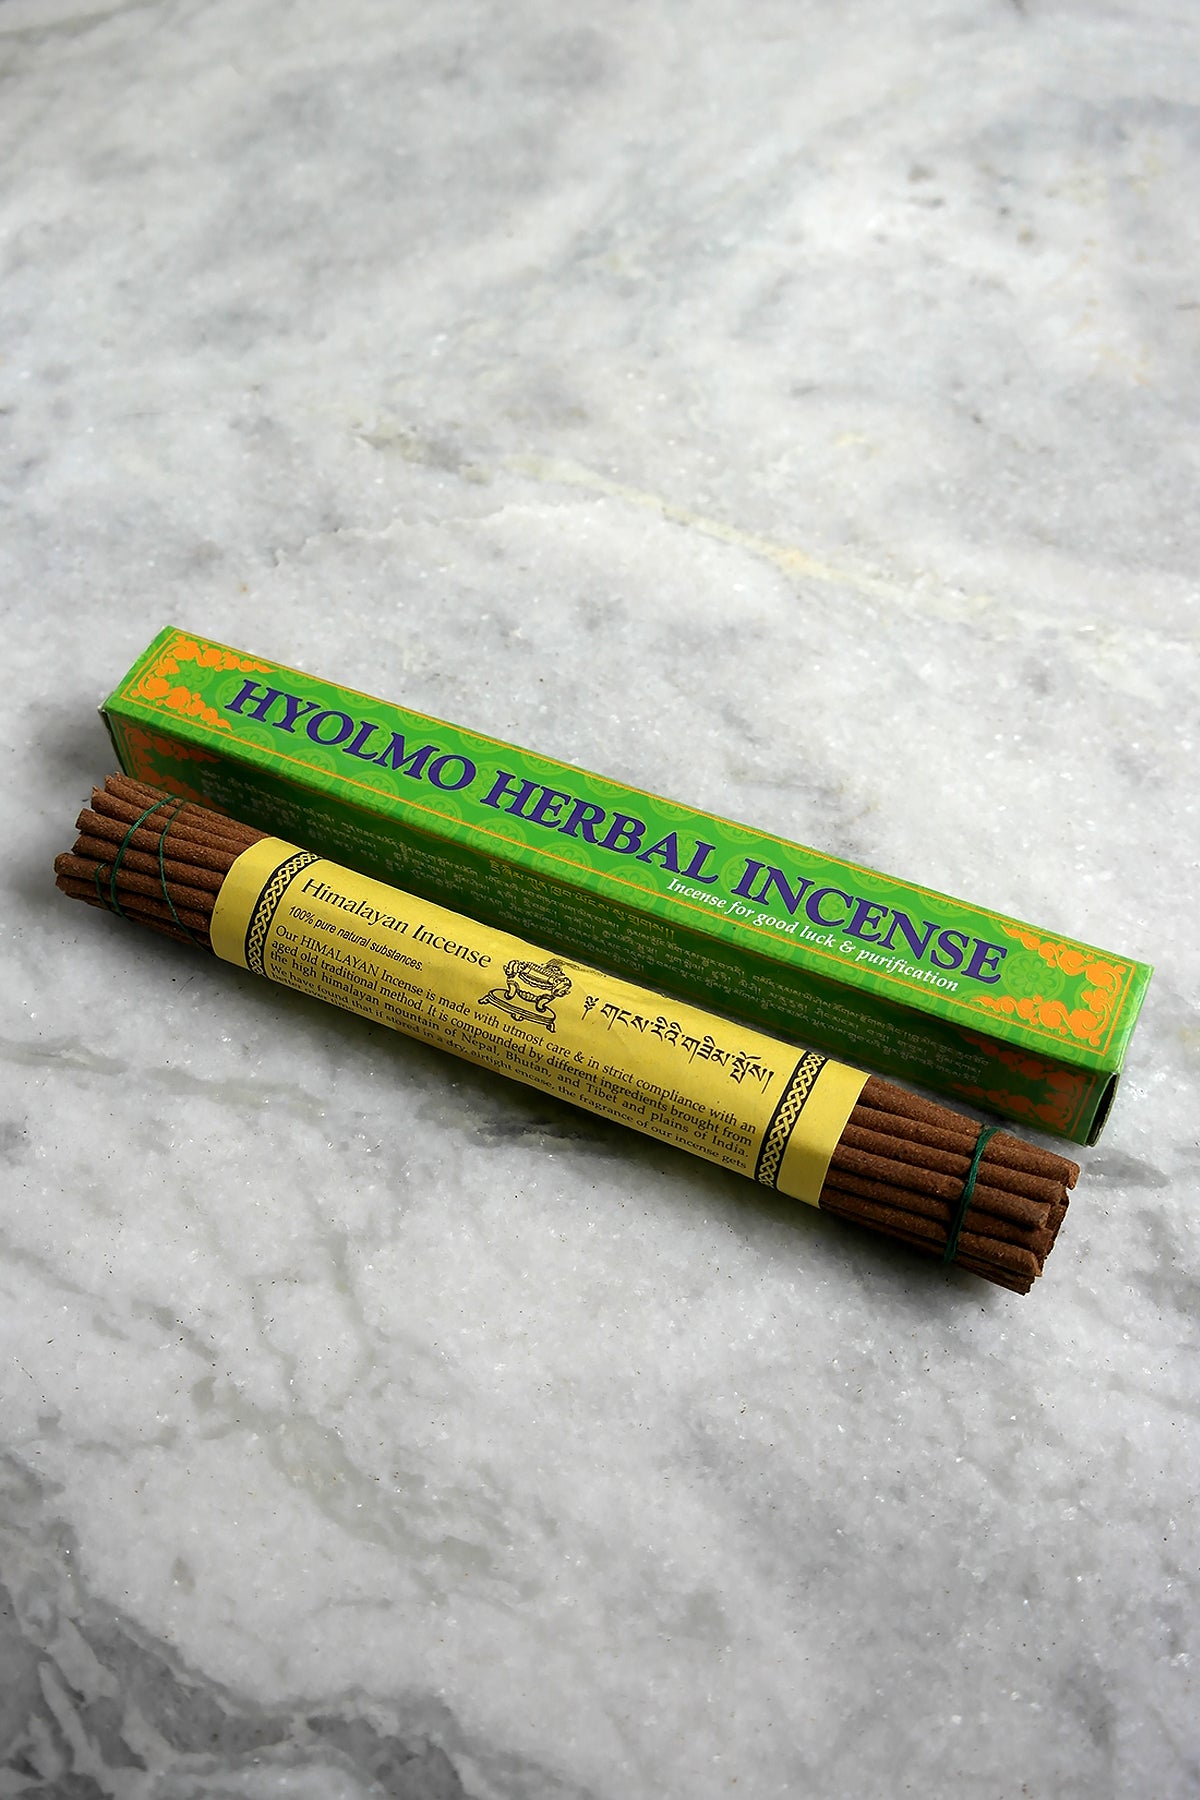 Hyolmo Herbal Incense Sticks- incense for good luck and purification